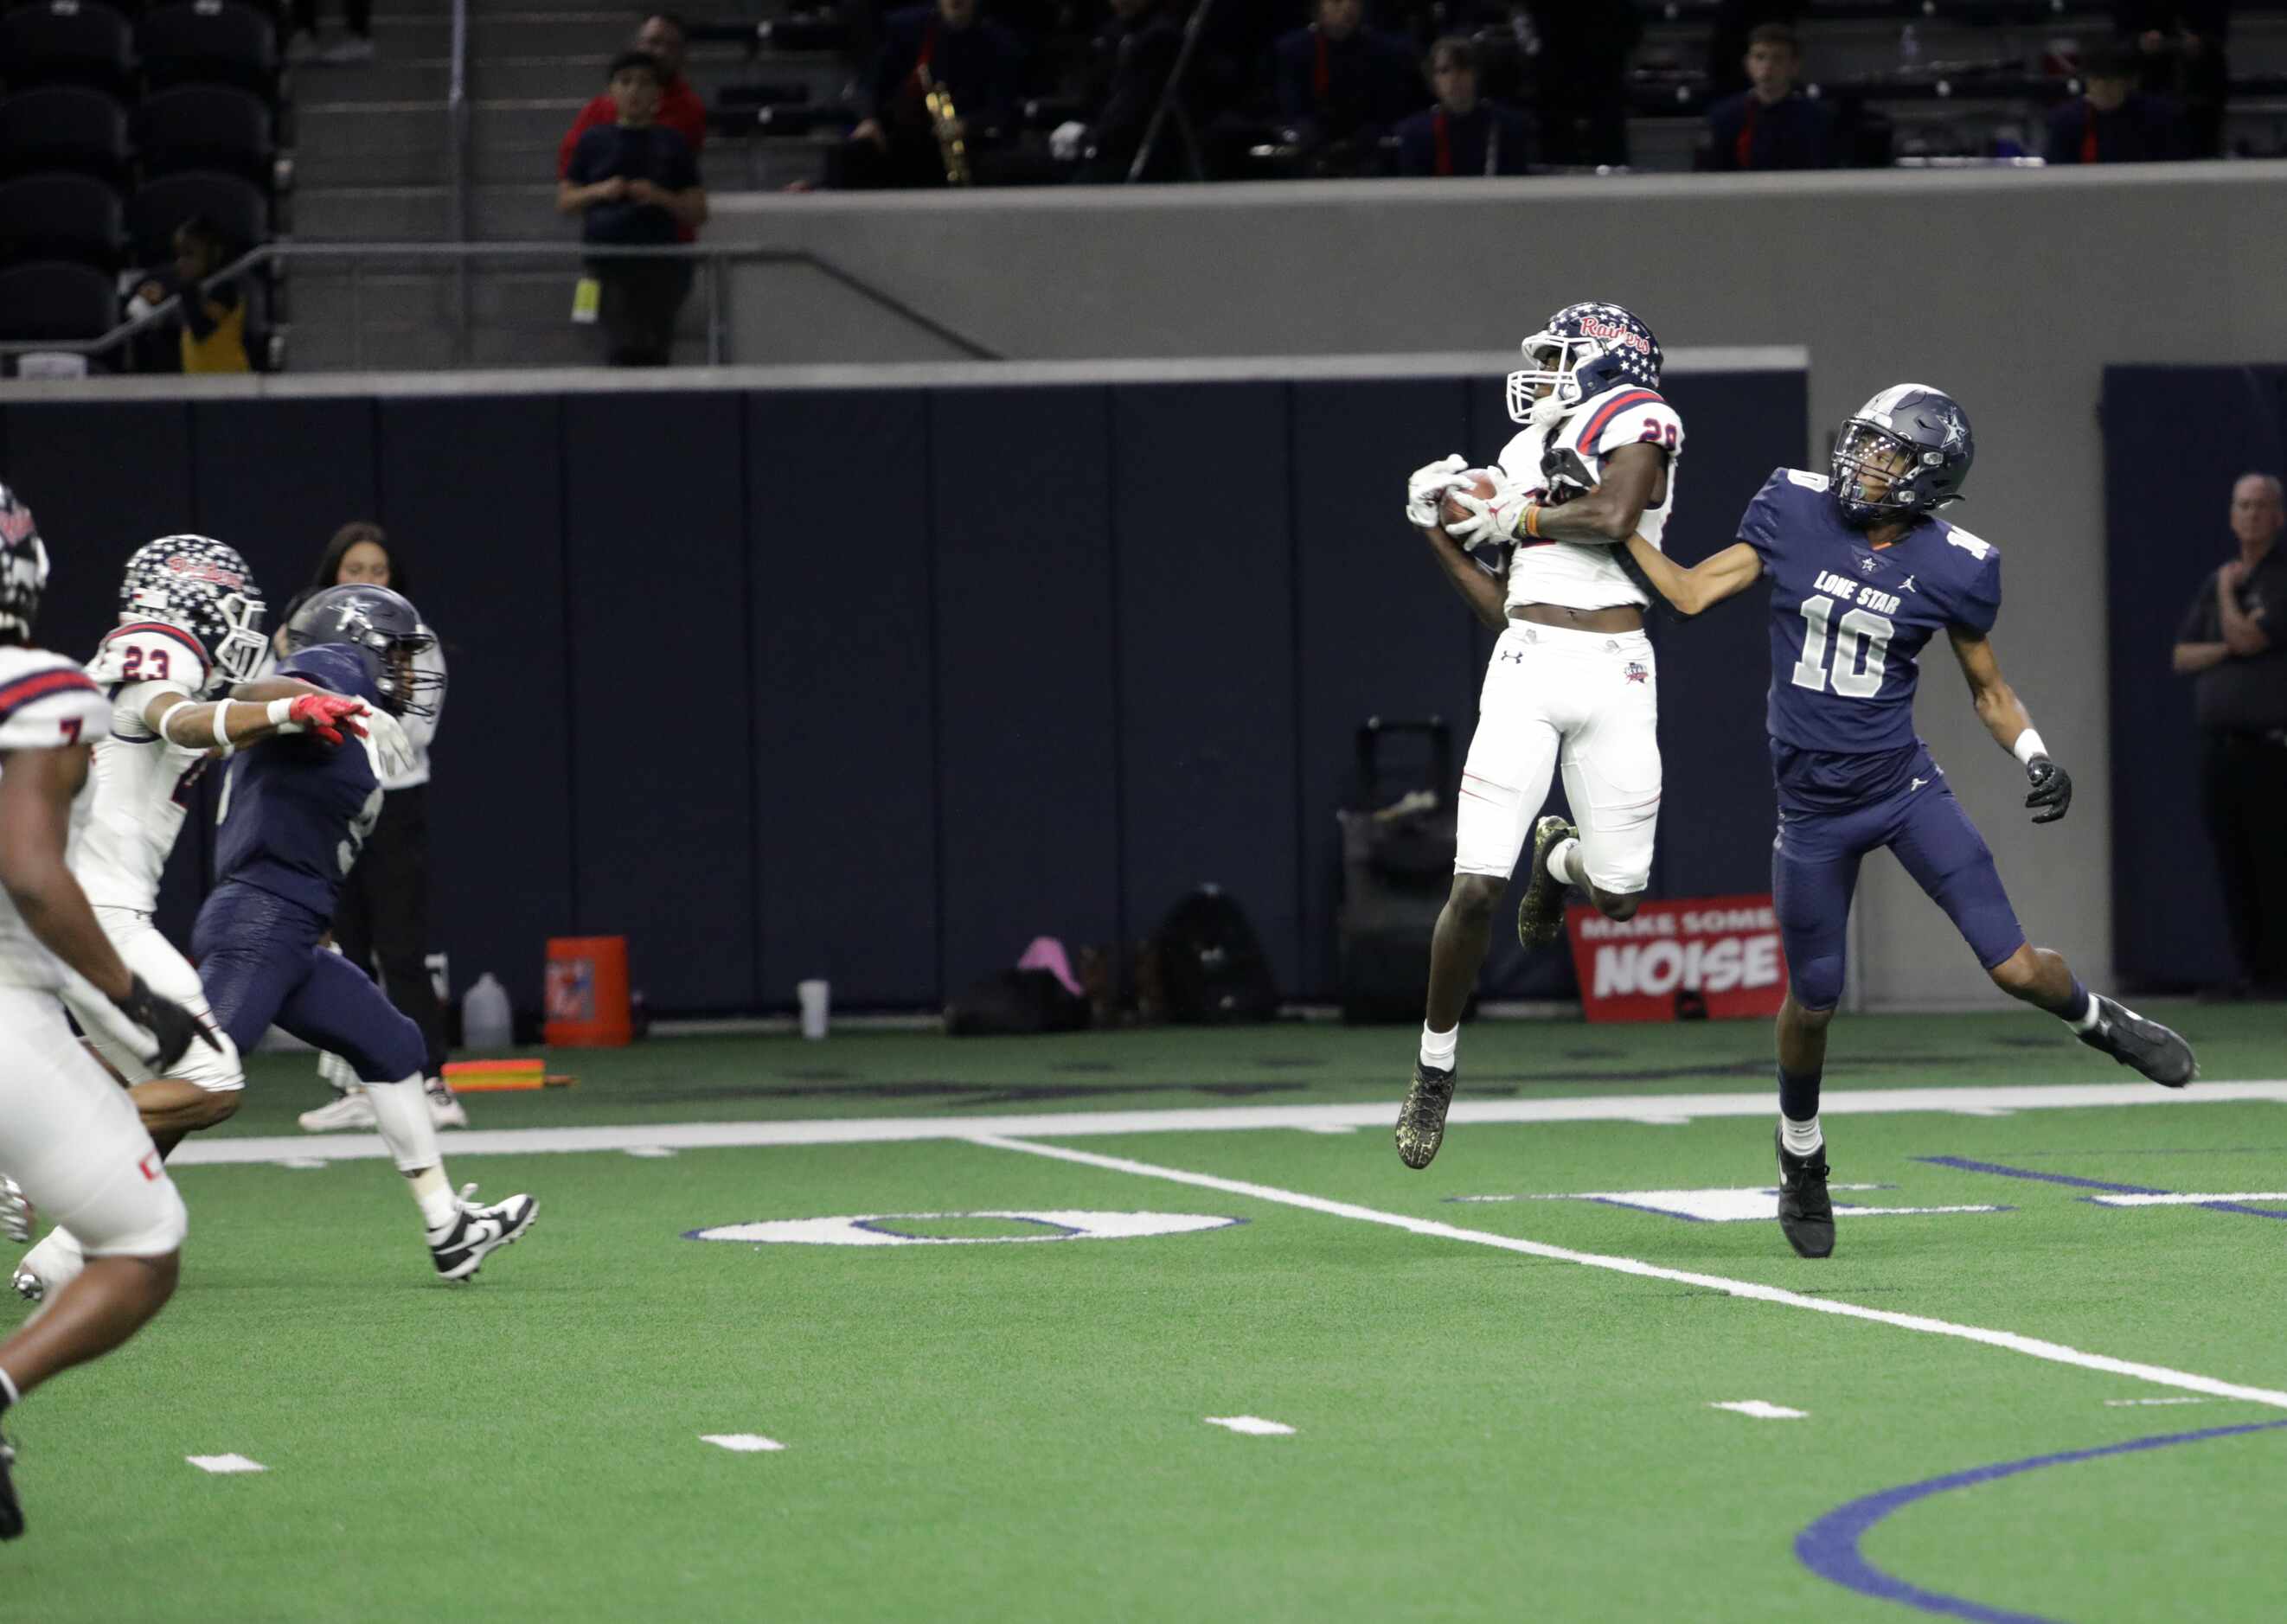 Ryan player #29, Chance Rucker, grabs an interception that was meant for Lone Star player...